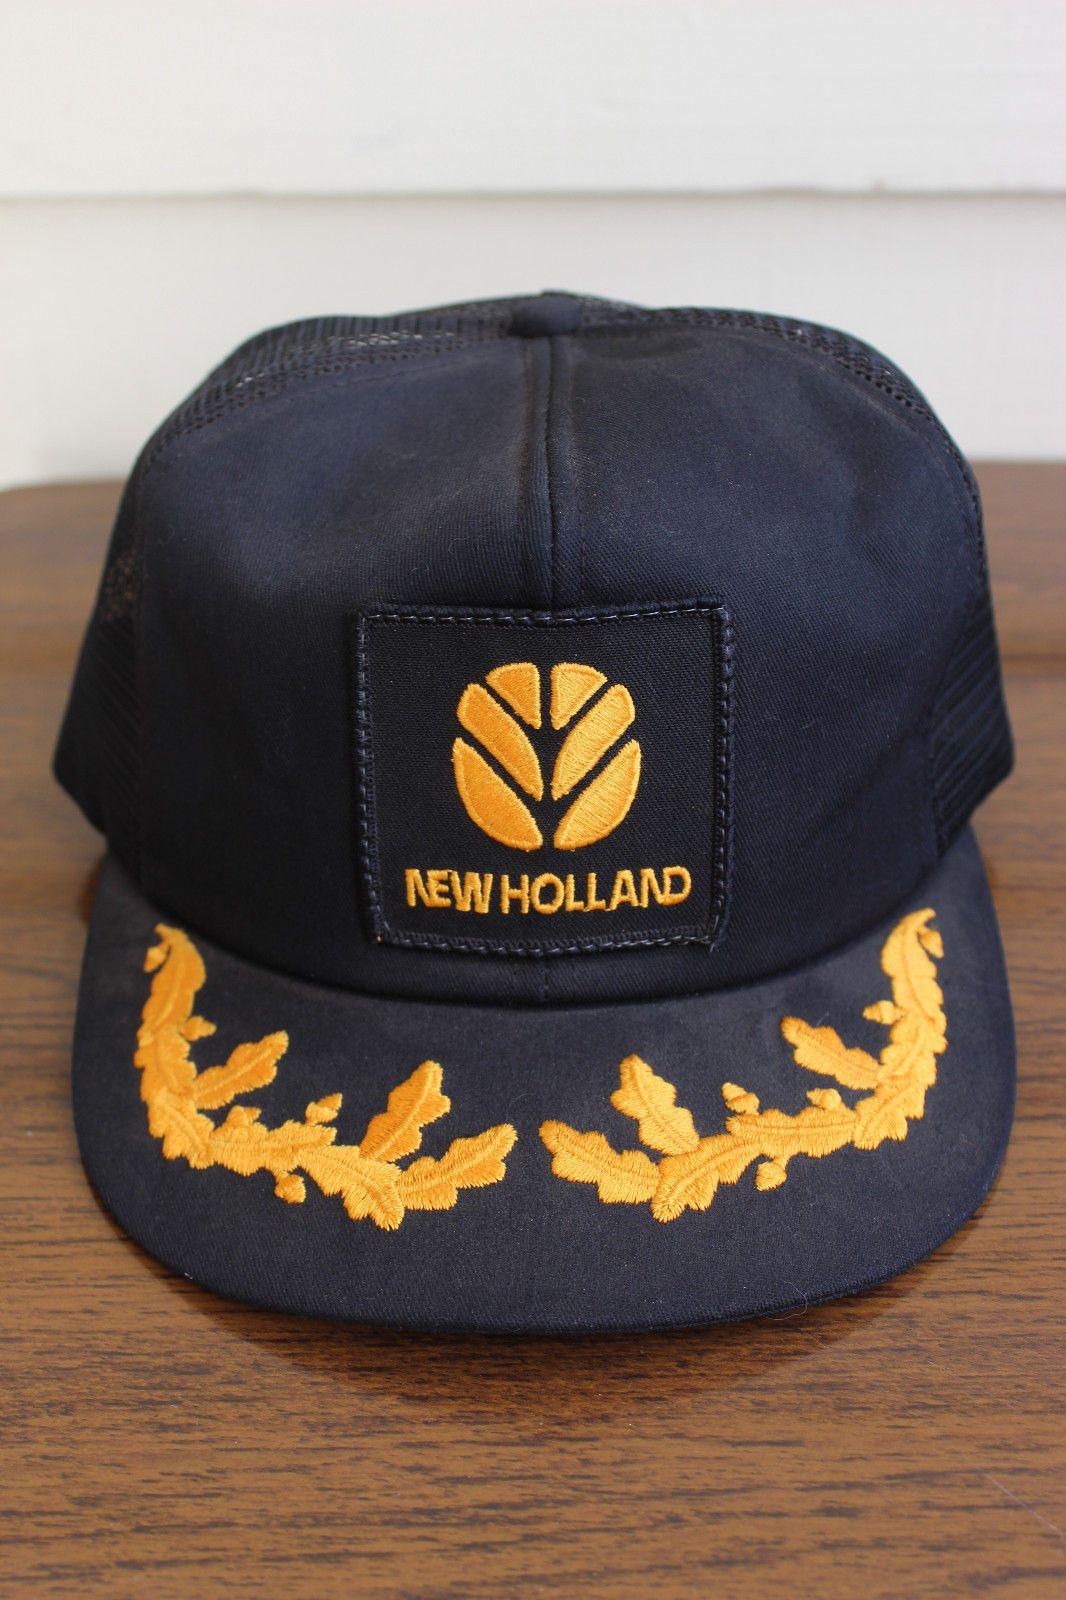 Vintage New Holland Logo - Donald Trump Schedule and Appearances